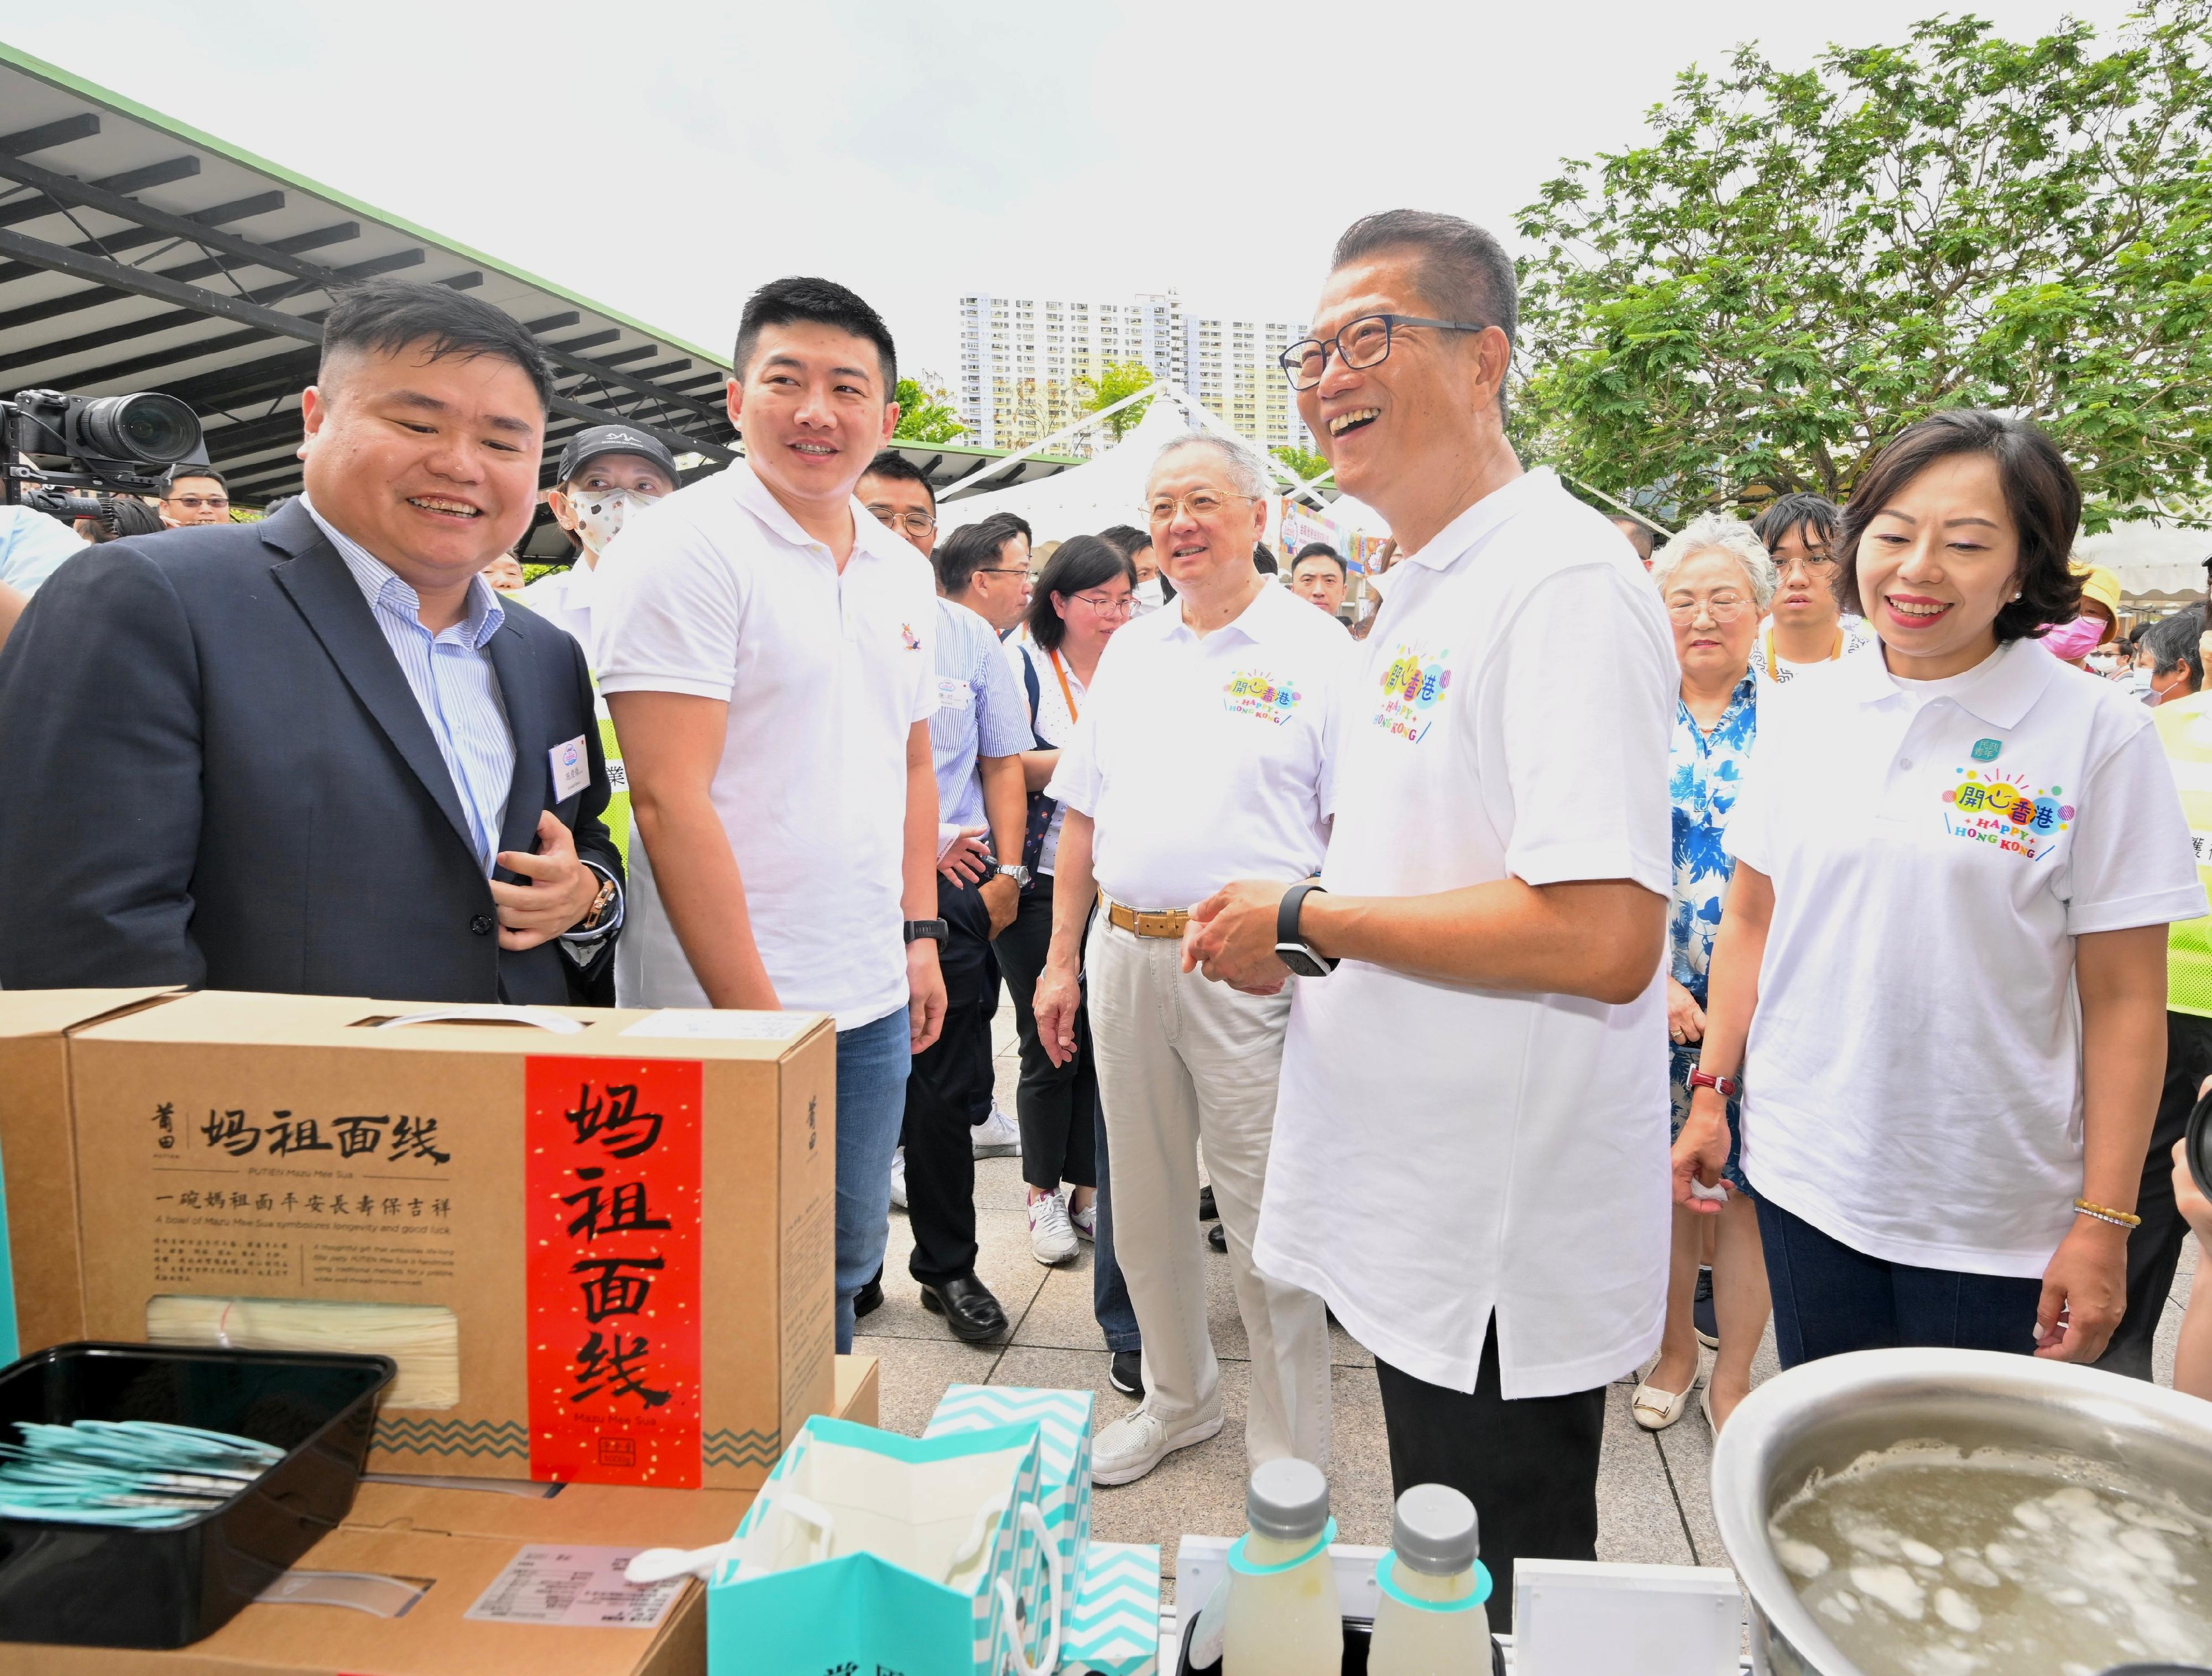 The Financial Secretary, Mr Paul Chan, officiated at the opening ceremony of the second "Happy Hong Kong" Gourmet Marketplace today (May 6). Photo shows Mr Chan (second right), accompanied by the Secretary for Home and Youth Affairs, Miss Alice Mak (first right), and Non-official Member of the Executive Council, Legislative Council Member (Catering) Mr Tommy Cheung (third right), exchanging views with an exhibitor.